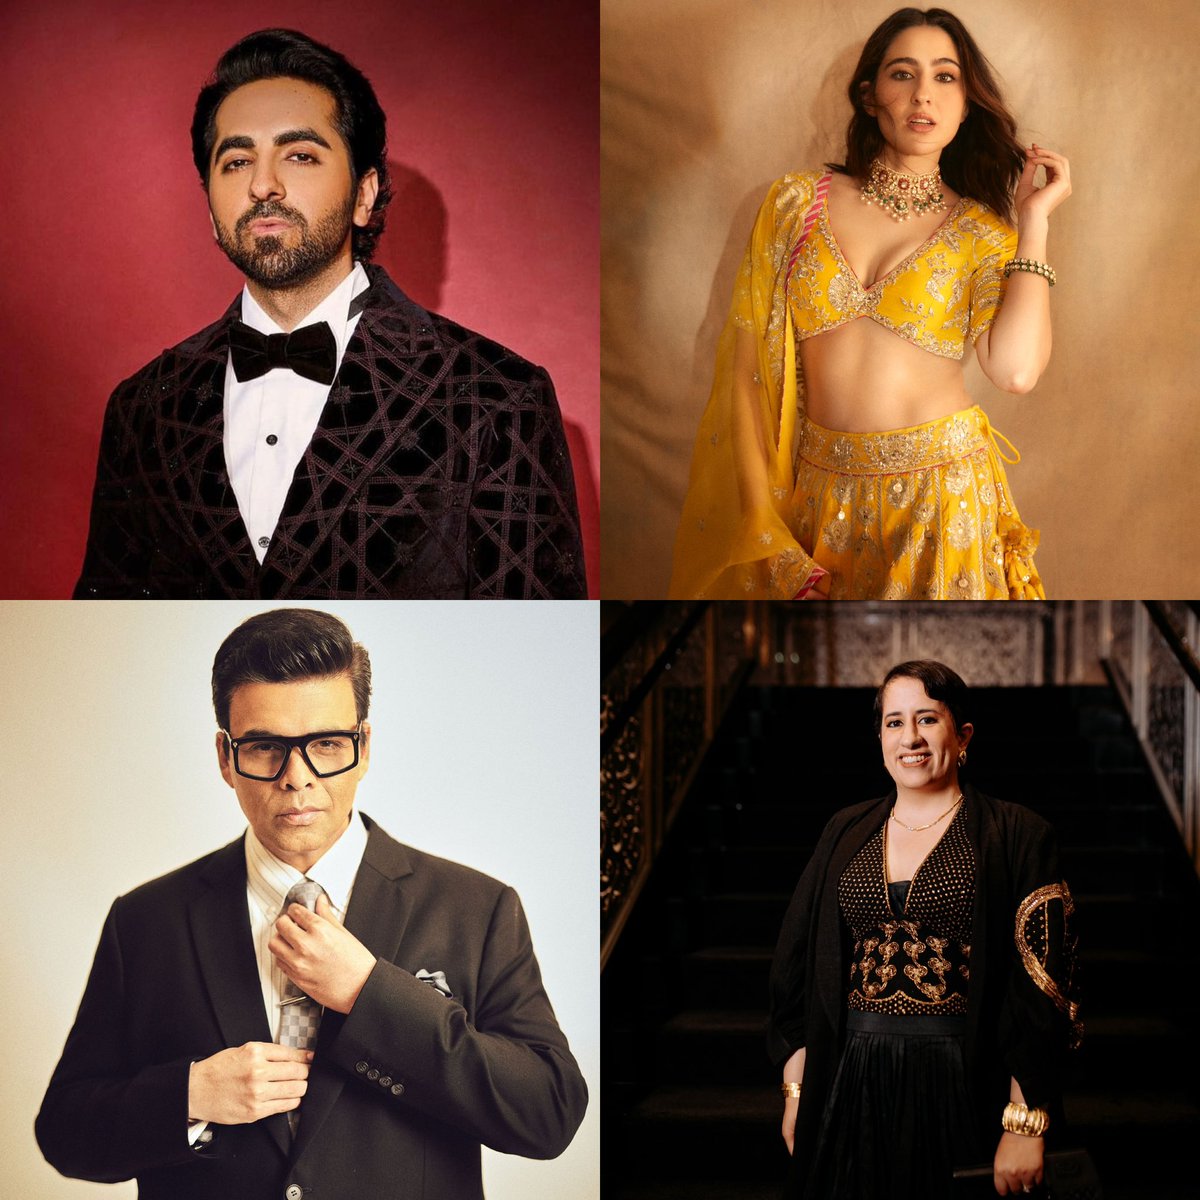 MAJOR UPDATE- Dharma Productions & Sikhya Entertainment team up again for a unique action-comedy starring #AyushmannKhurrana & #SaraAliKhan. Written and directed by Aakash Kaushik, this marks their third theatrical collaboration. Shooting has begun, with the title to be